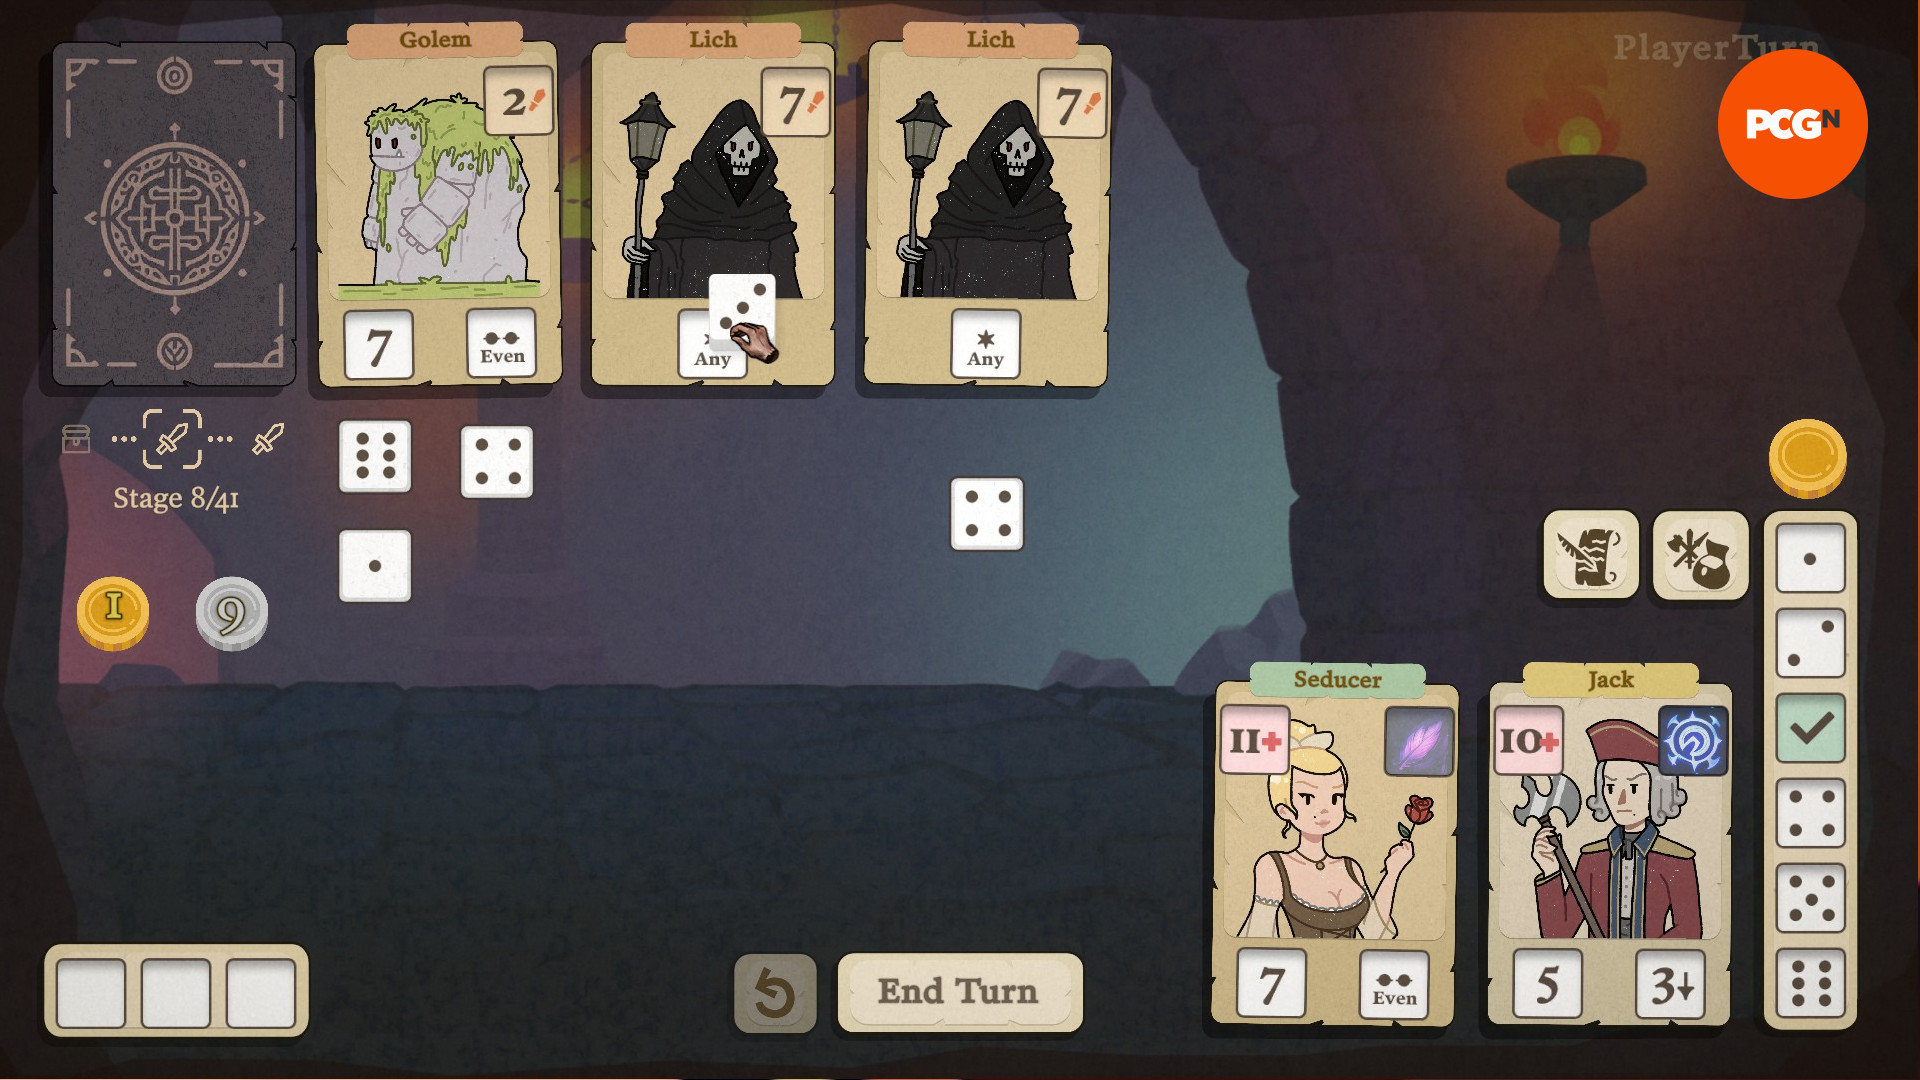 Dice and Fold demo - The player lines up dice to match the enemies facing them.